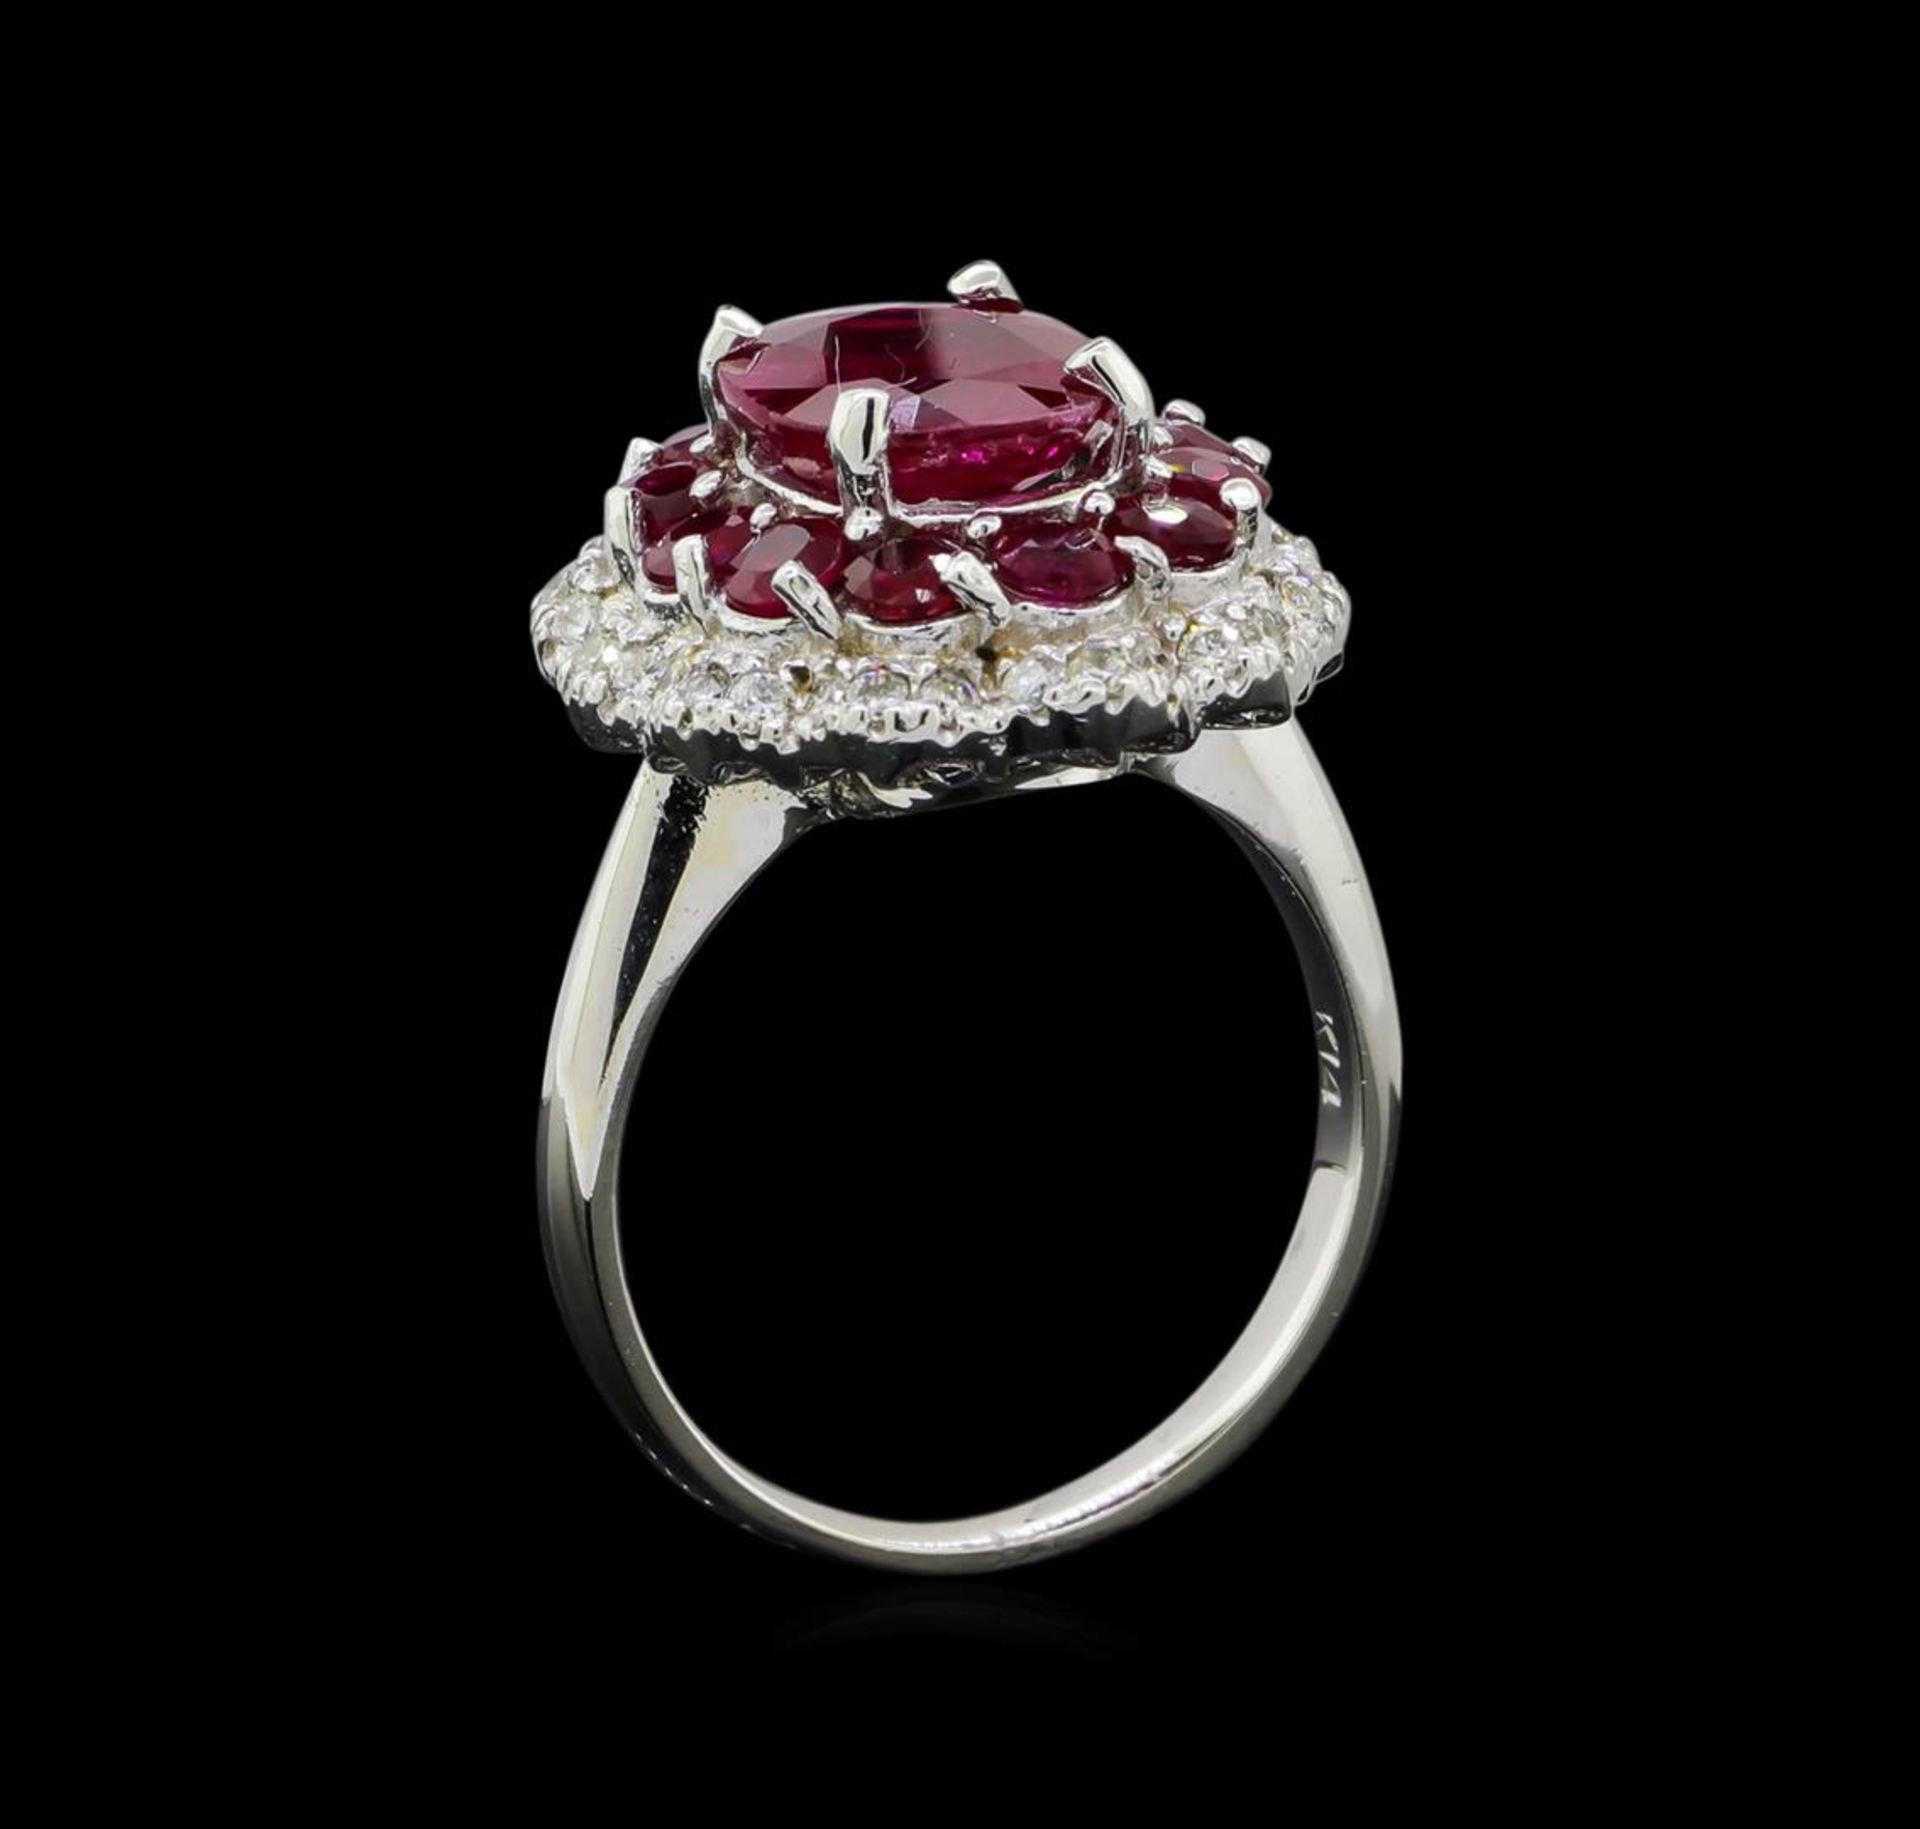 GIA Cert 4.54 ctw Ruby and Diamond Ring - 14KT White Gold - Image 4 of 6